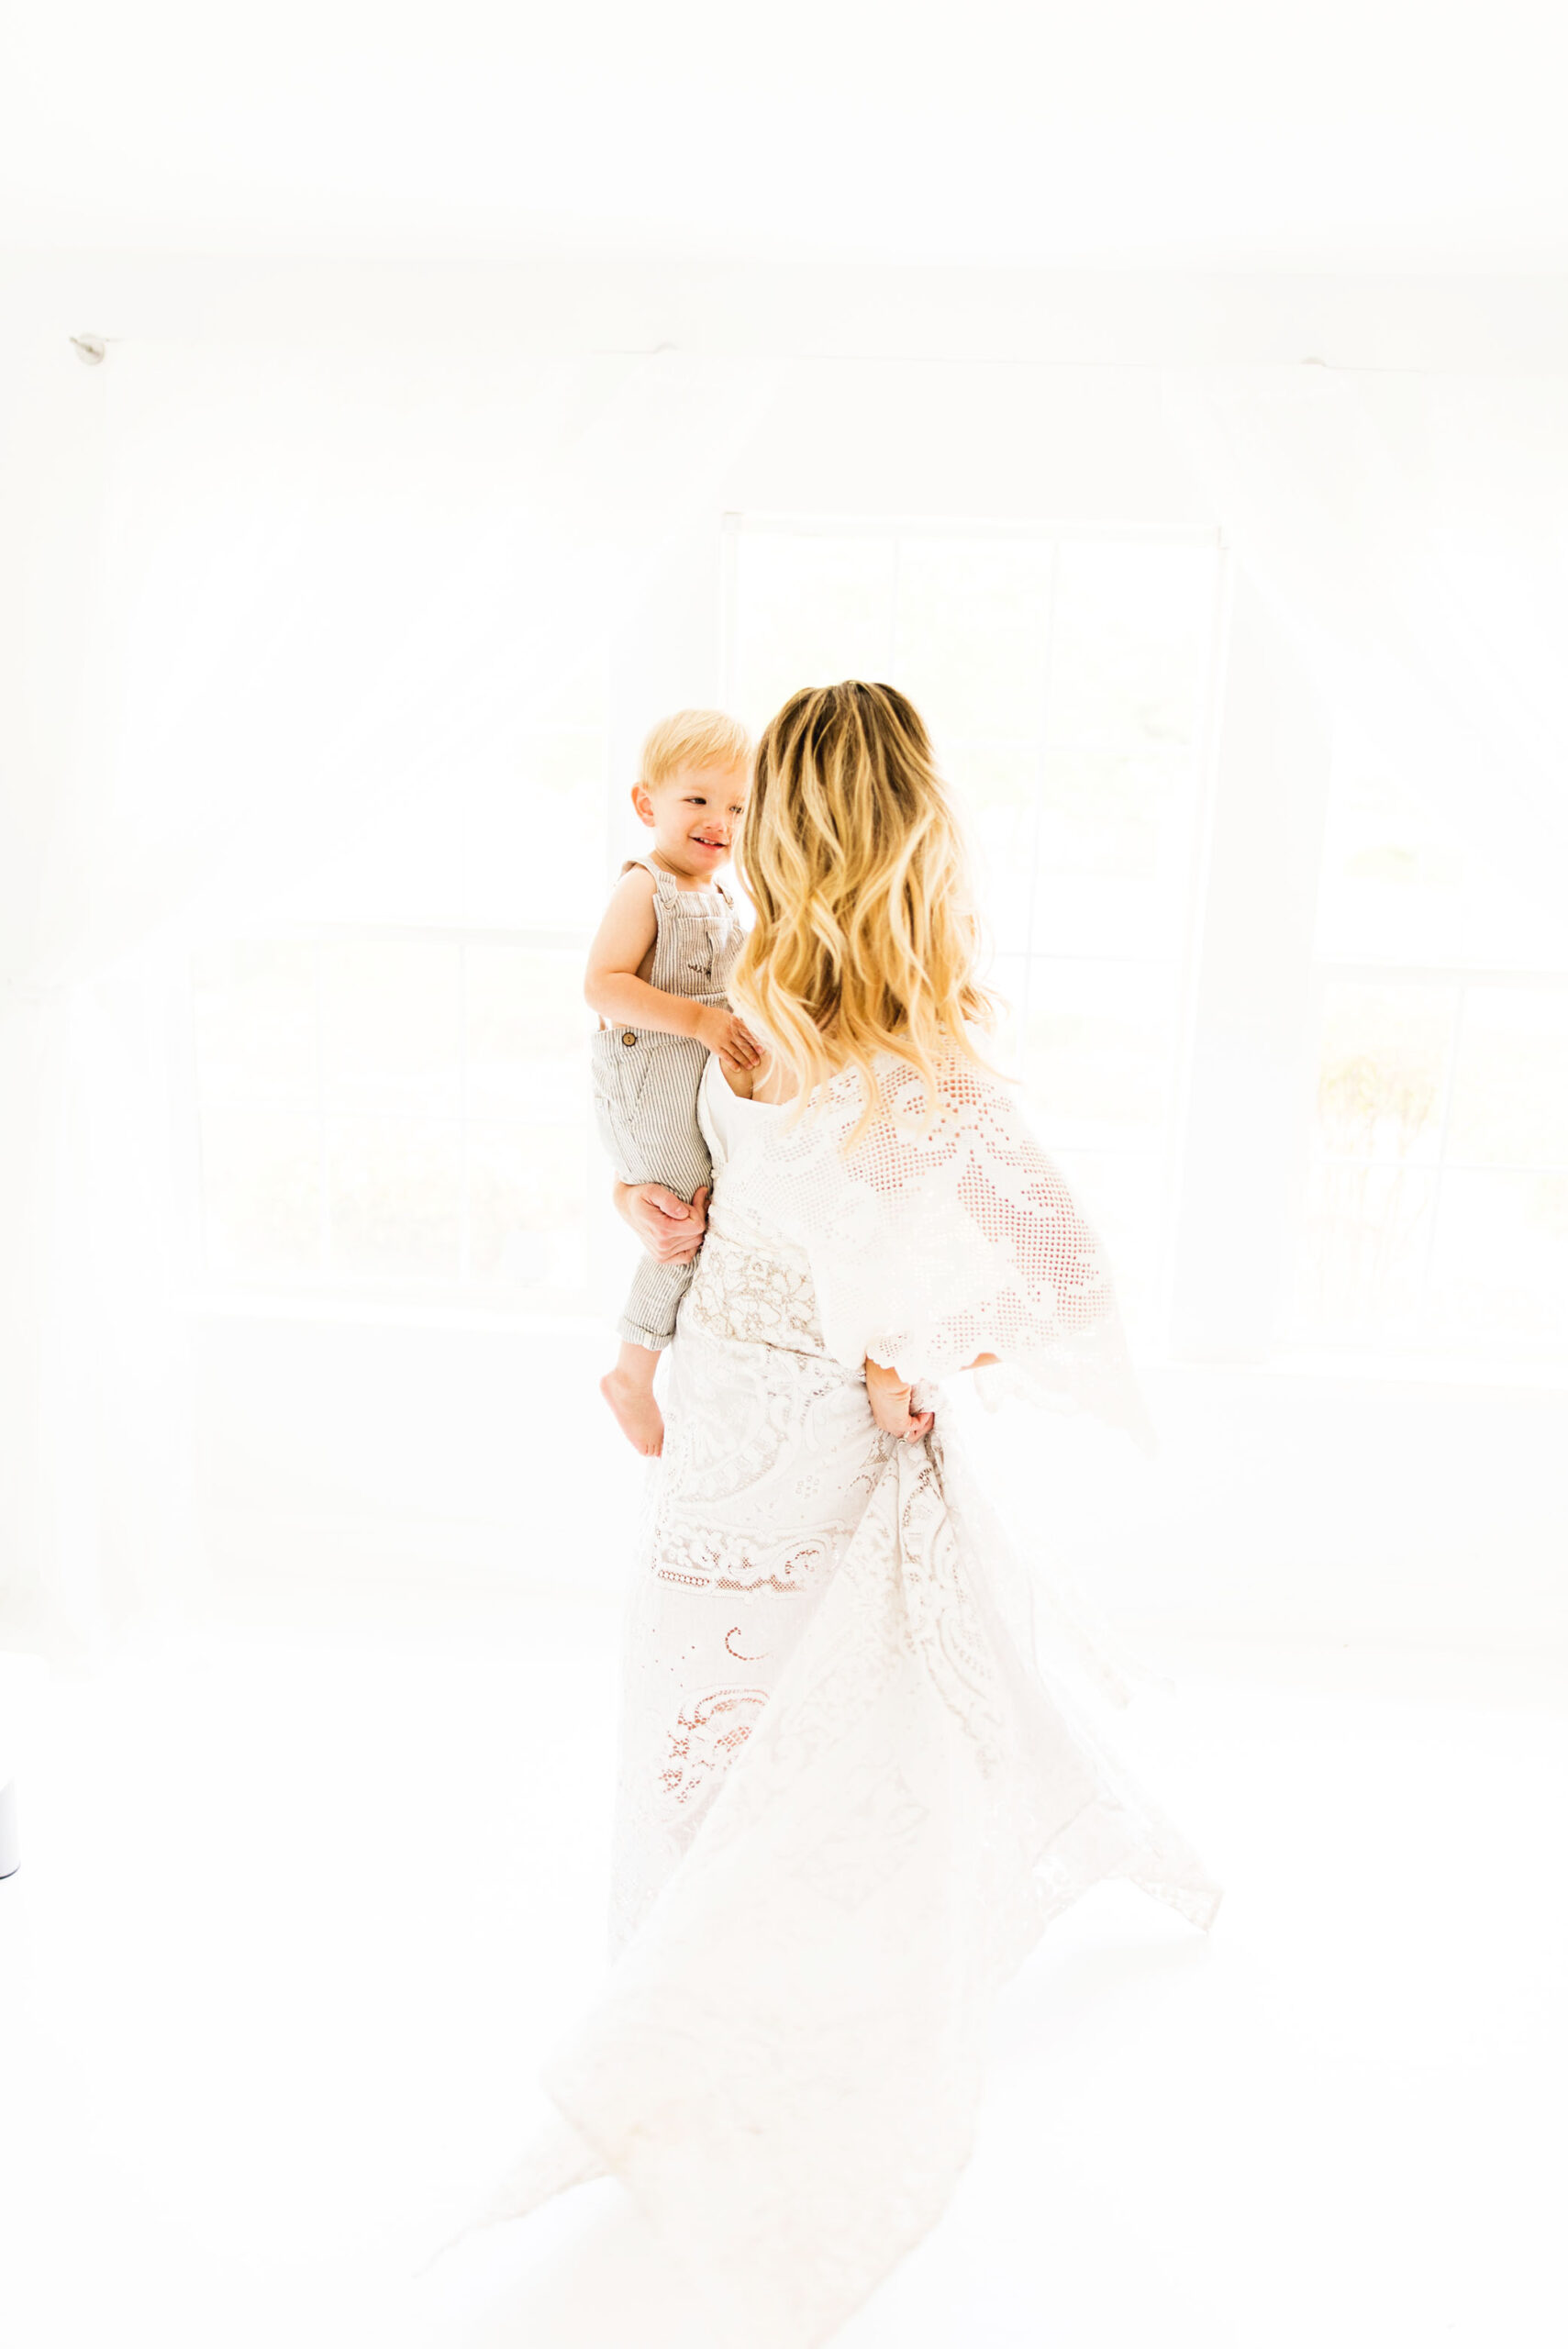 Mom dances with son at the studio captured by Sweet Beginnings Photography by Stephanie